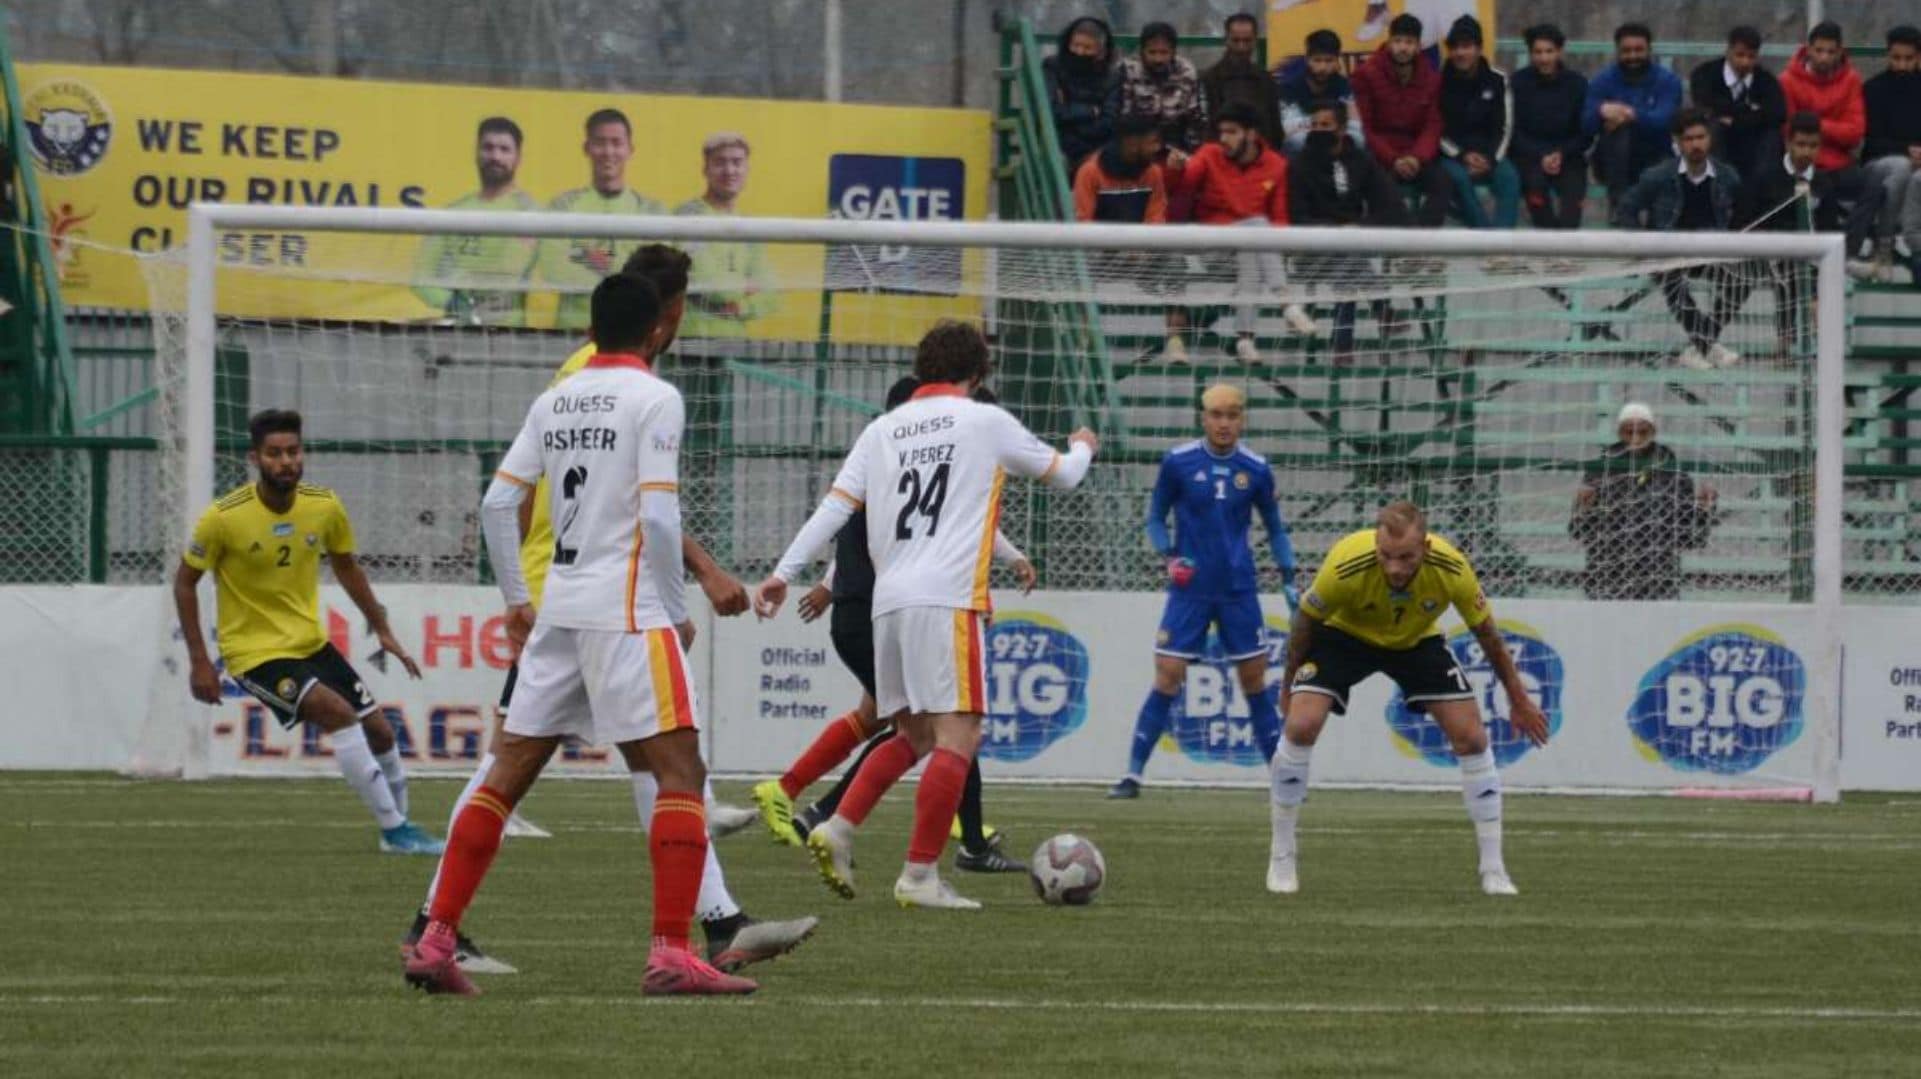 For Real Kashmir FC, the challenges and thrills of hosting an I-League contest in Srinagar